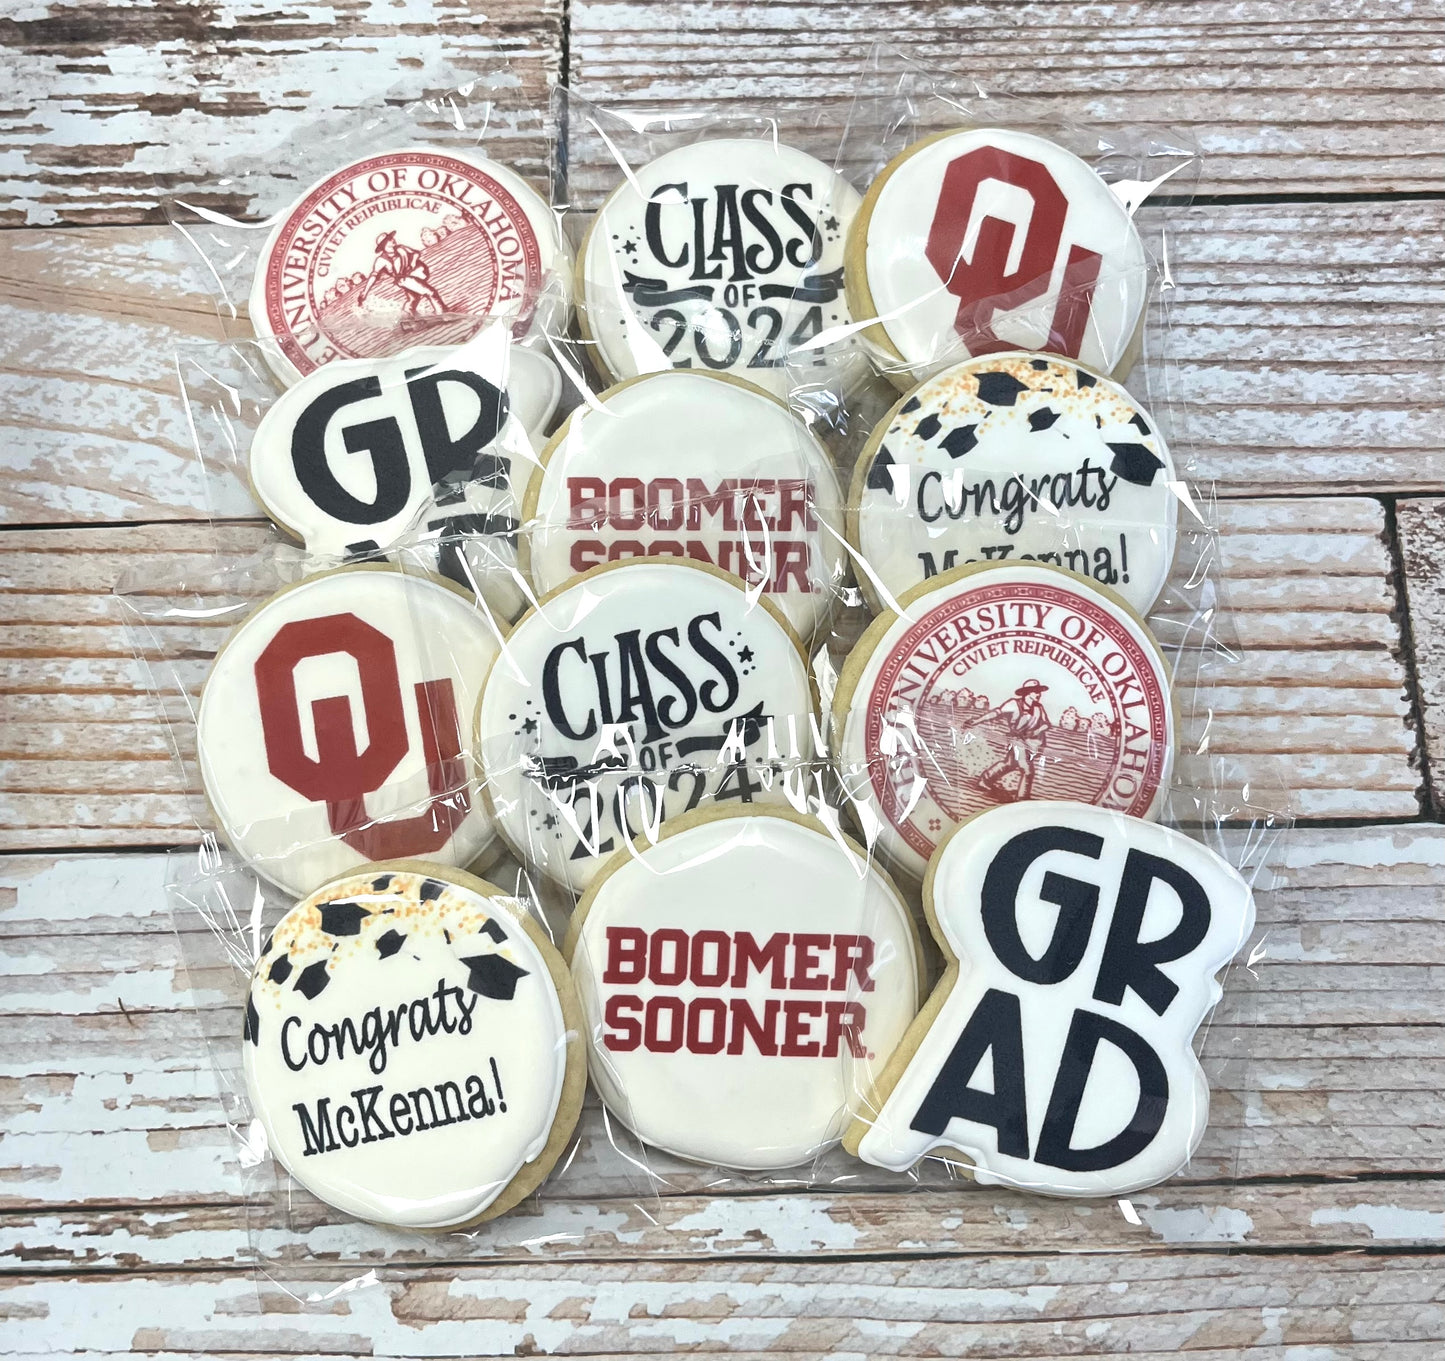 University of Oklahoma OU Boomer Sooner Direct Printed Pre-Designed Set of Graduation Cookies--12 Count